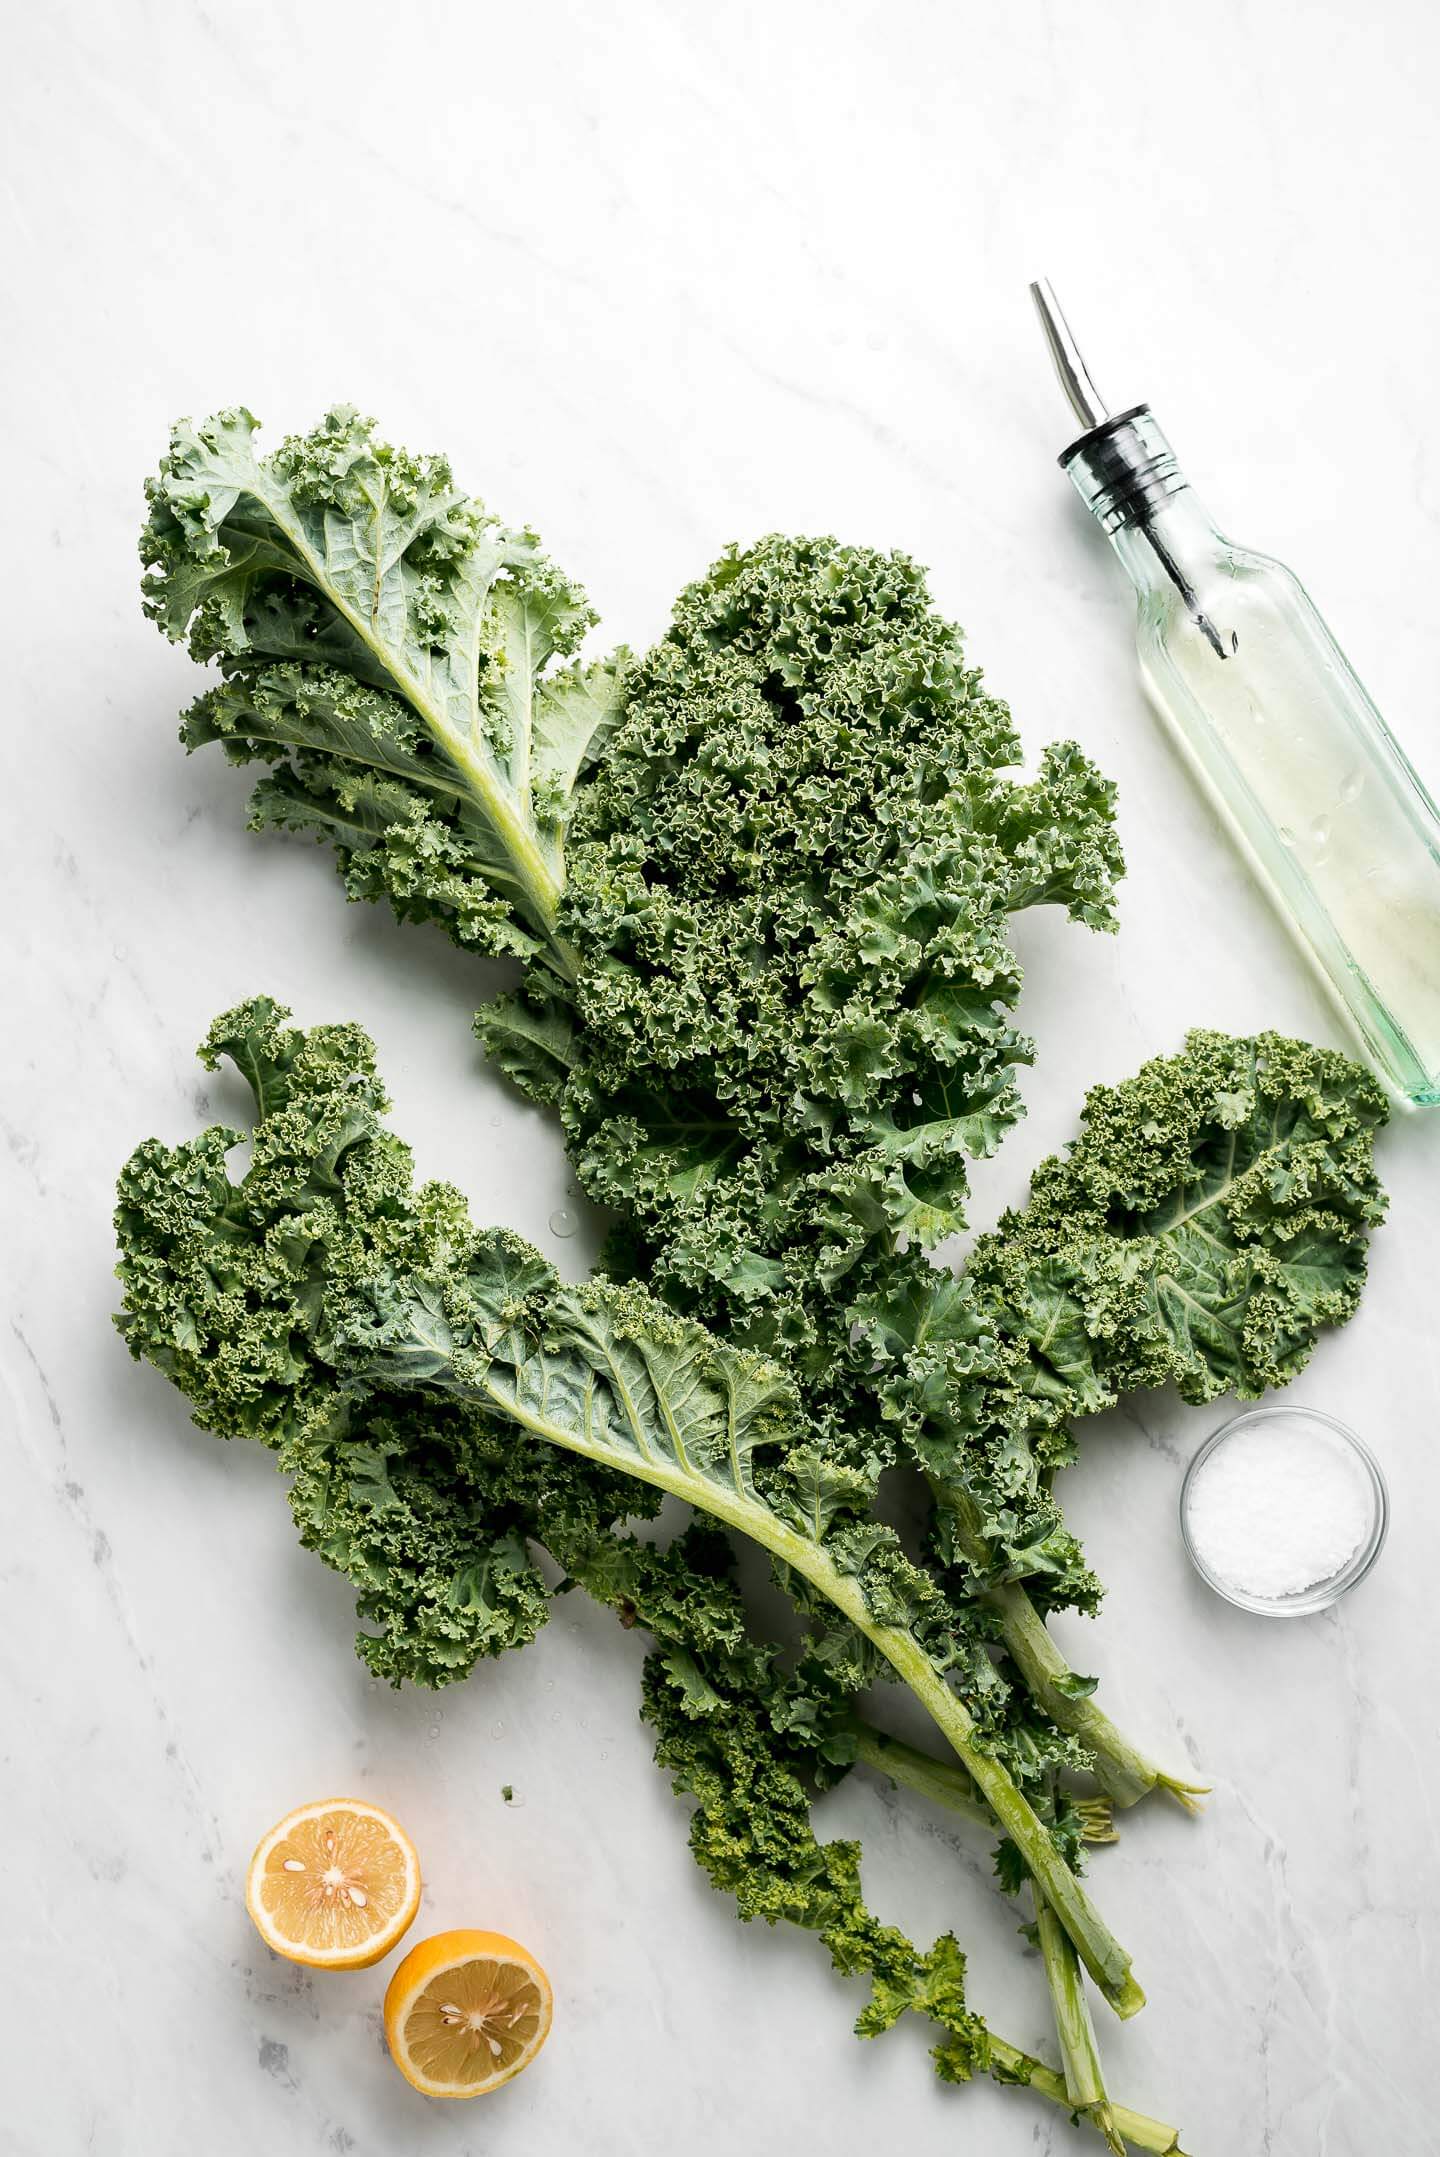 Leaves of raw kale on a marble surface with a bottle of oil, lemon halves, and a small bowl of kosher salt.